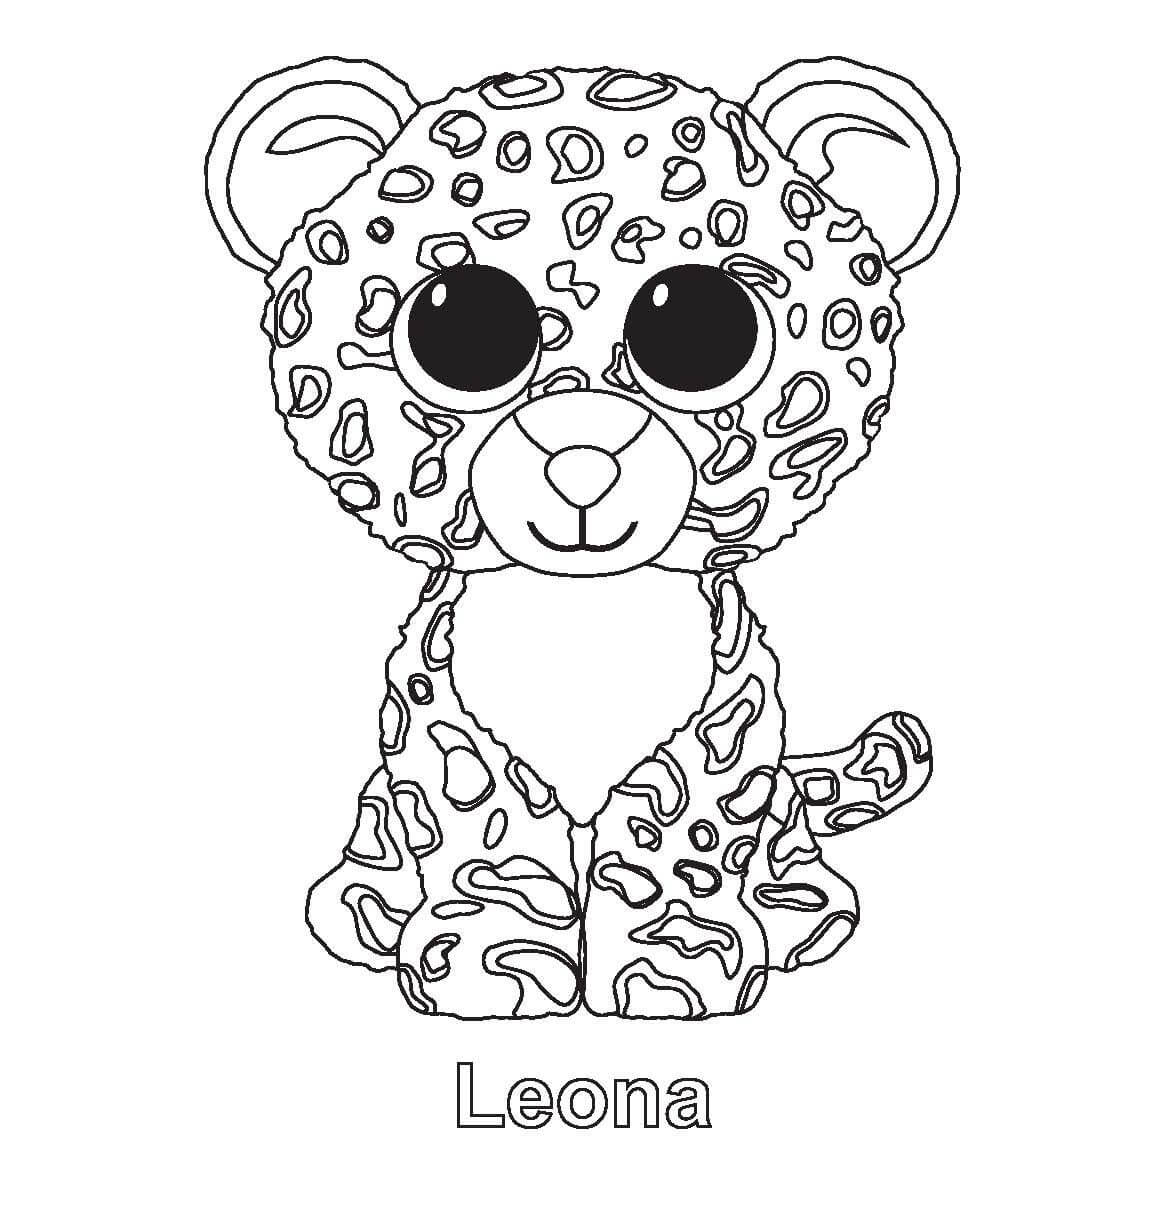 Leona - Beanie Boo Coloring Pages